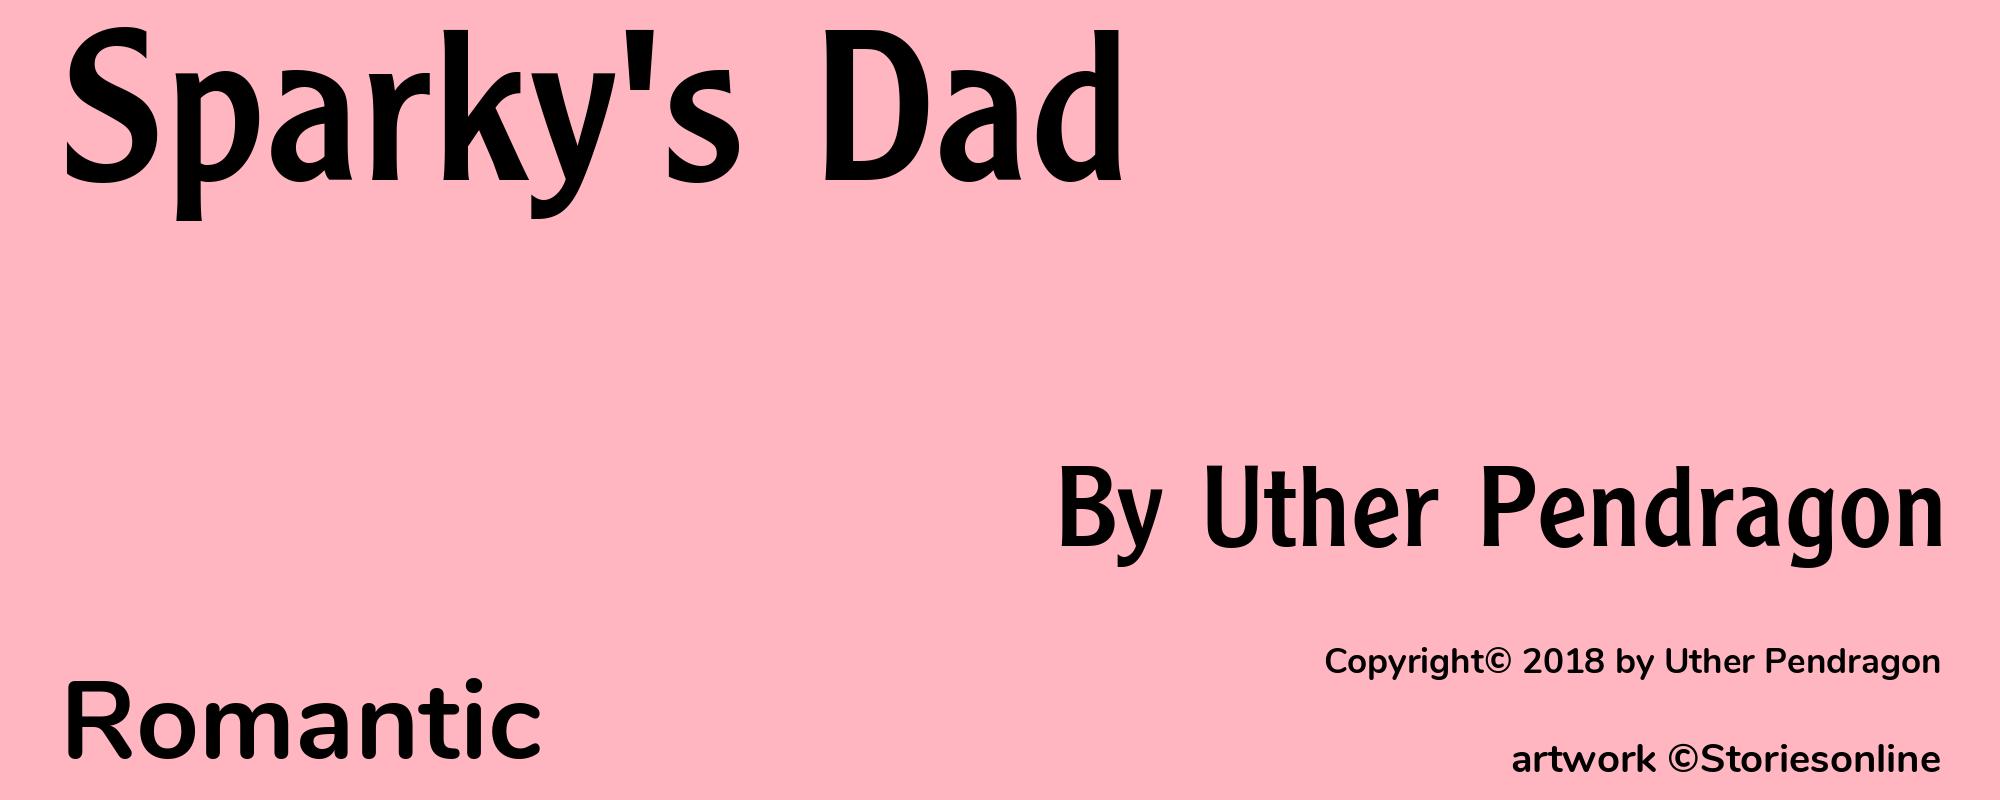 Sparky's Dad - Cover